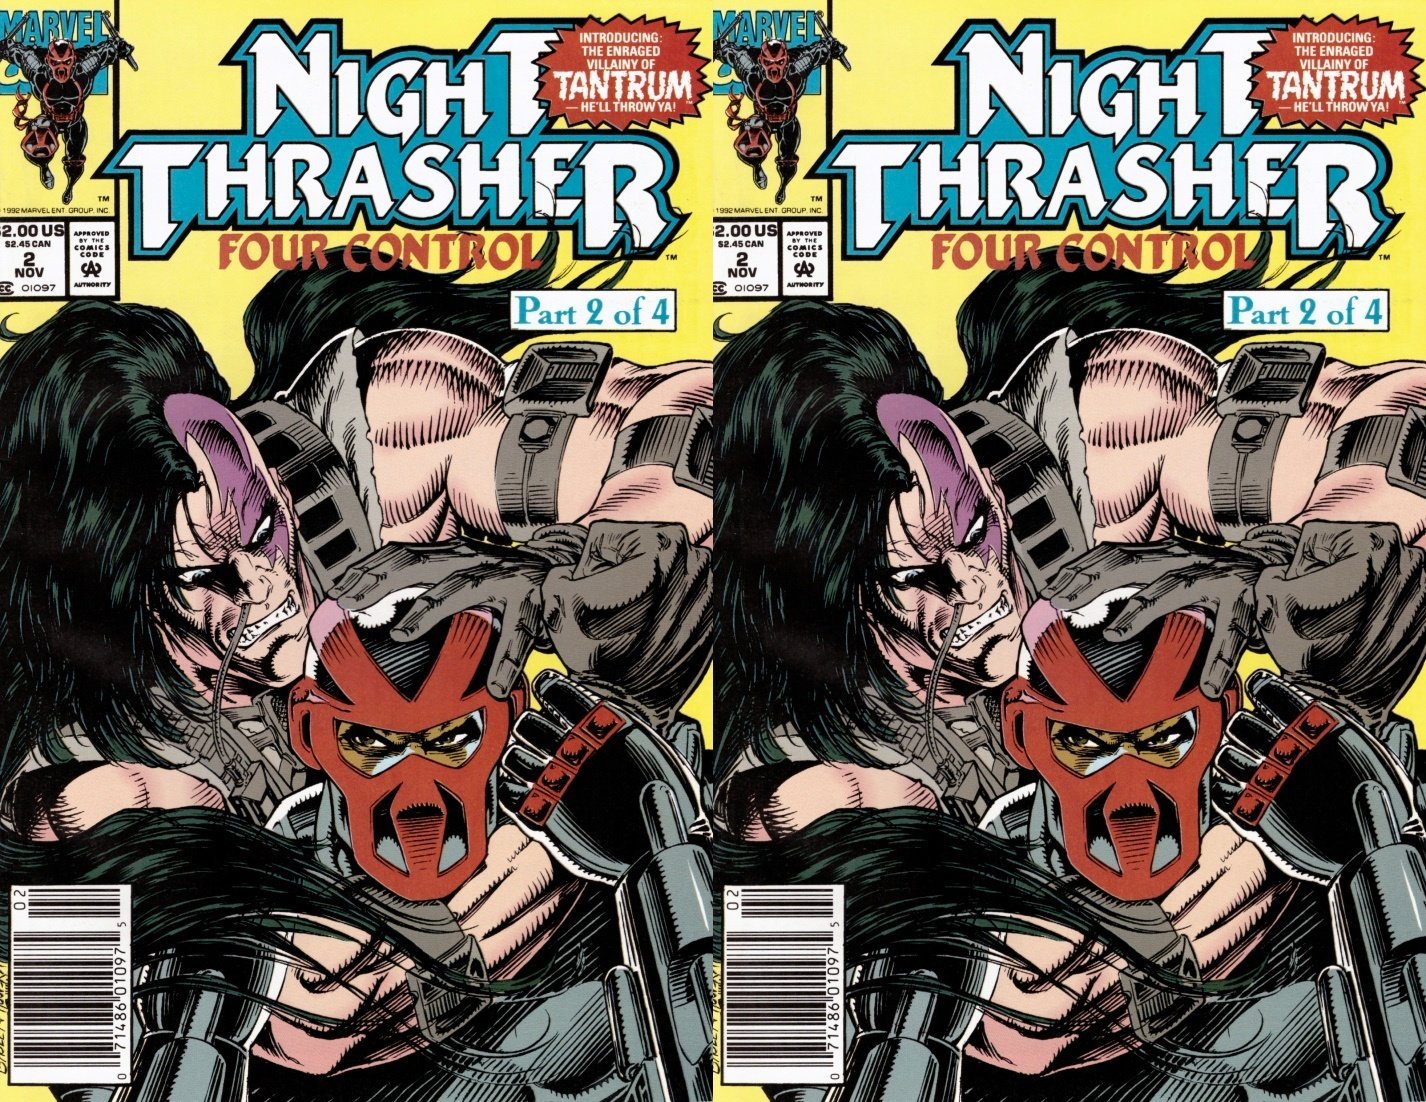 Night Thrasher: Four Control #2 Newsstand Covers (1992-1993) Marvel - 2 Comics